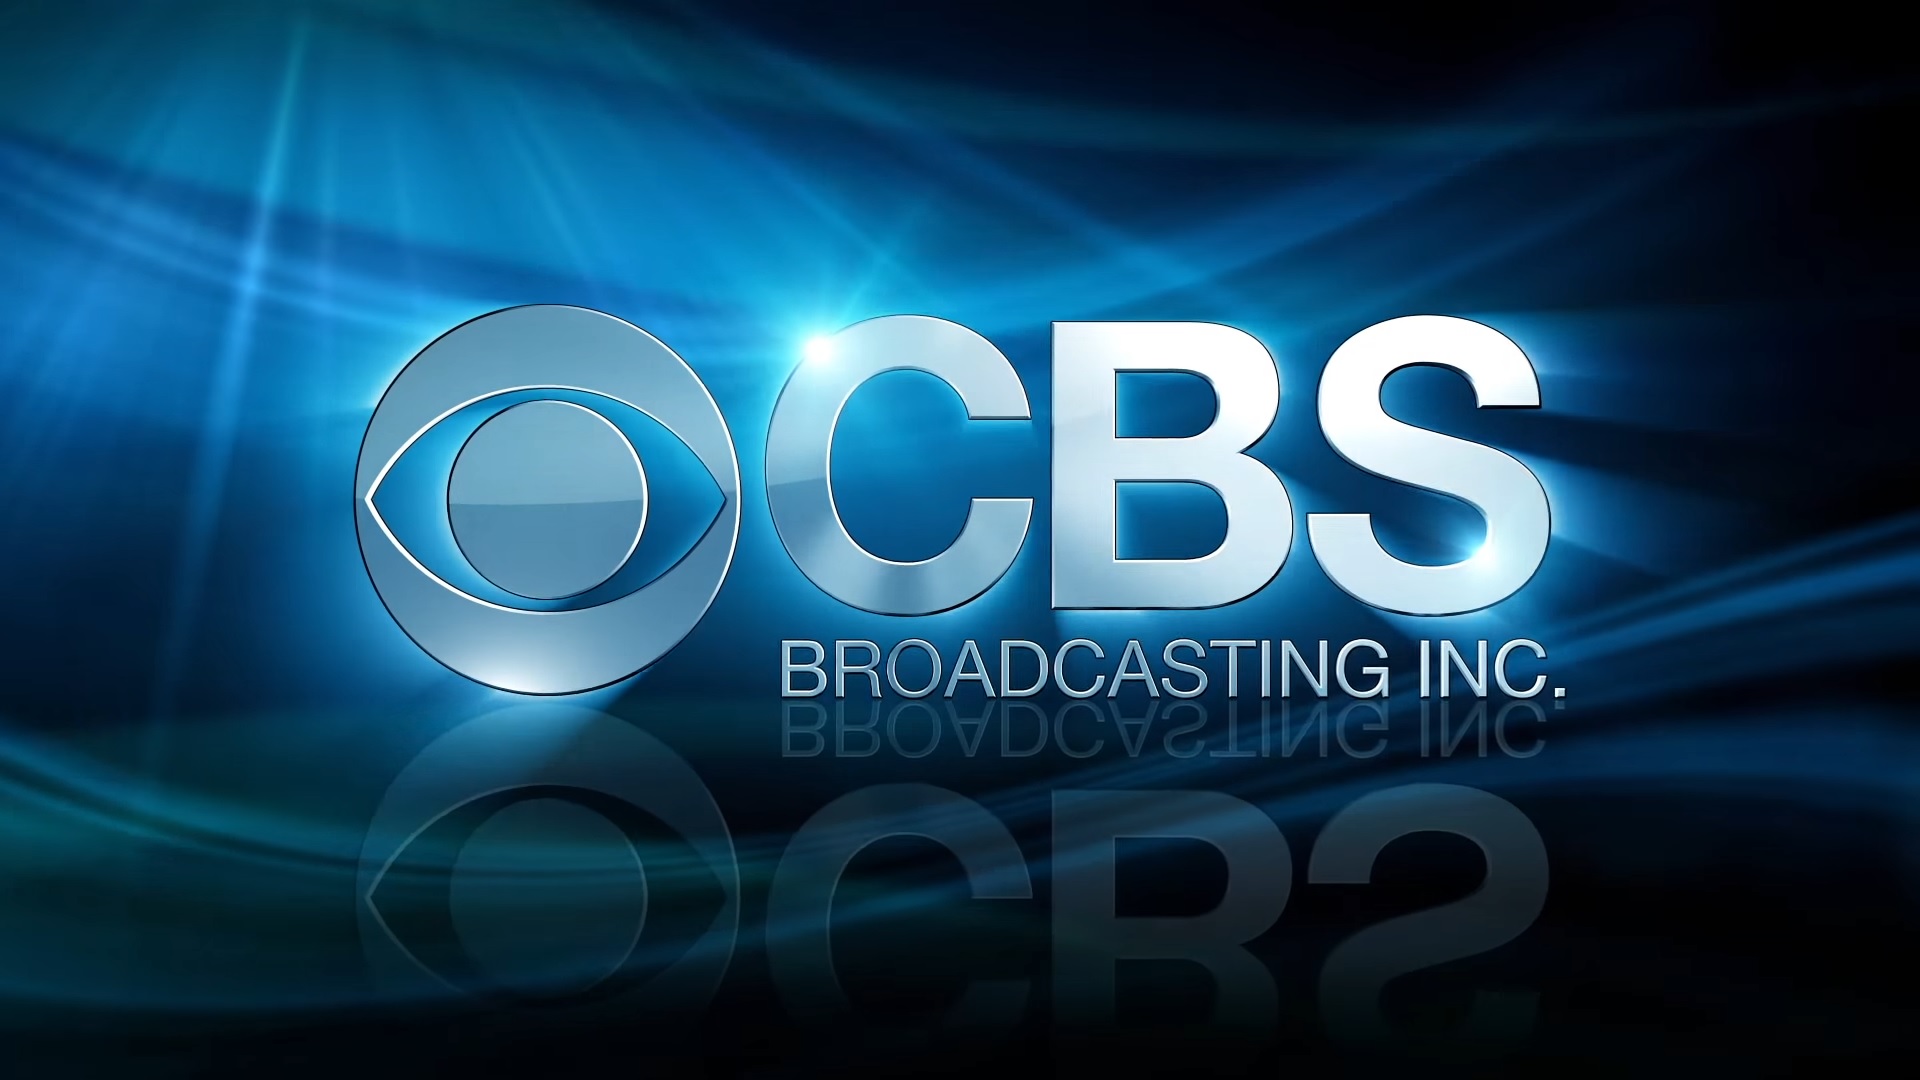 biography of tv channel cbs